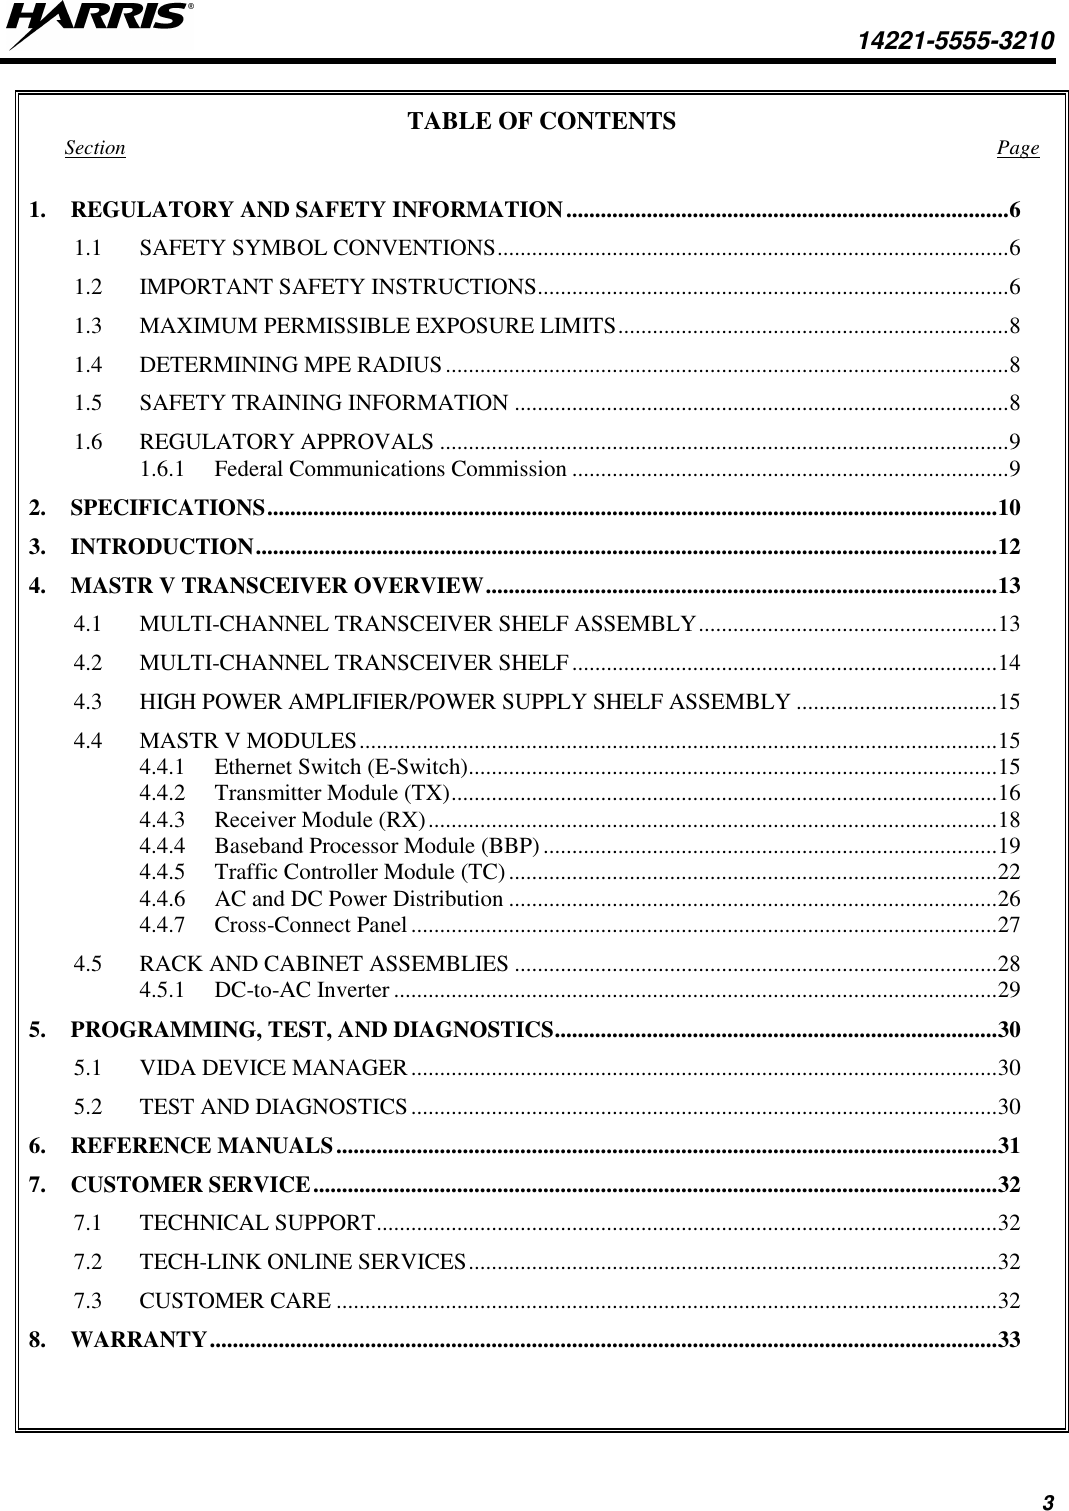  14221-5555-3210 3 TABLE OF CONTENTS Section  Page 1. REGULATORY AND SAFETY INFORMATION ............................................................................. 6 1.1 SAFETY SYMBOL CONVENTIONS ......................................................................................... 6 1.2 IMPORTANT SAFETY INSTRUCTIONS .................................................................................. 6 1.3 MAXIMUM PERMISSIBLE EXPOSURE LIMITS .................................................................... 8 1.4 DETERMINING MPE RADIUS .................................................................................................. 8 1.5 SAFETY TRAINING INFORMATION ...................................................................................... 8 1.6 REGULATORY APPROVALS ................................................................................................... 9 1.6.1 Federal Communications Commission ............................................................................ 9 2. SPECIFICATIONS ............................................................................................................................... 10 3. INTRODUCTION ................................................................................................................................. 12 4. MASTR V TRANSCEIVER OVERVIEW ......................................................................................... 13 4.1 MULTI-CHANNEL TRANSCEIVER SHELF ASSEMBLY .................................................... 13 4.2 MULTI-CHANNEL TRANSCEIVER SHELF .......................................................................... 14 4.3 HIGH POWER AMPLIFIER/POWER SUPPLY SHELF ASSEMBLY ................................... 15 4.4 MASTR V MODULES ............................................................................................................... 15 4.4.1 Ethernet Switch (E-Switch) ............................................................................................ 15 4.4.2 Transmitter Module (TX) ............................................................................................... 16 4.4.3 Receiver Module (RX) ................................................................................................... 18 4.4.4 Baseband Processor Module (BBP) ............................................................................... 19 4.4.5 Traffic Controller Module (TC) ..................................................................................... 22 4.4.6 AC and DC Power Distribution ..................................................................................... 26 4.4.7 Cross-Connect Panel ...................................................................................................... 27 4.5 RACK AND CABINET ASSEMBLIES .................................................................................... 28 4.5.1 DC-to-AC Inverter ......................................................................................................... 29 5. PROGRAMMING, TEST, AND DIAGNOSTICS ............................................................................. 30 5.1 VIDA DEVICE MANAGER ...................................................................................................... 30 5.2 TEST AND DIAGNOSTICS ...................................................................................................... 30 6. REFERENCE MANUALS ................................................................................................................... 31 7. CUSTOMER SERVICE ....................................................................................................................... 32 7.1 TECHNICAL SUPPORT ............................................................................................................ 32 7.2 TECH-LINK ONLINE SERVICES ............................................................................................ 32 7.3 CUSTOMER CARE ................................................................................................................... 32 8. WARRANTY ......................................................................................................................................... 33   